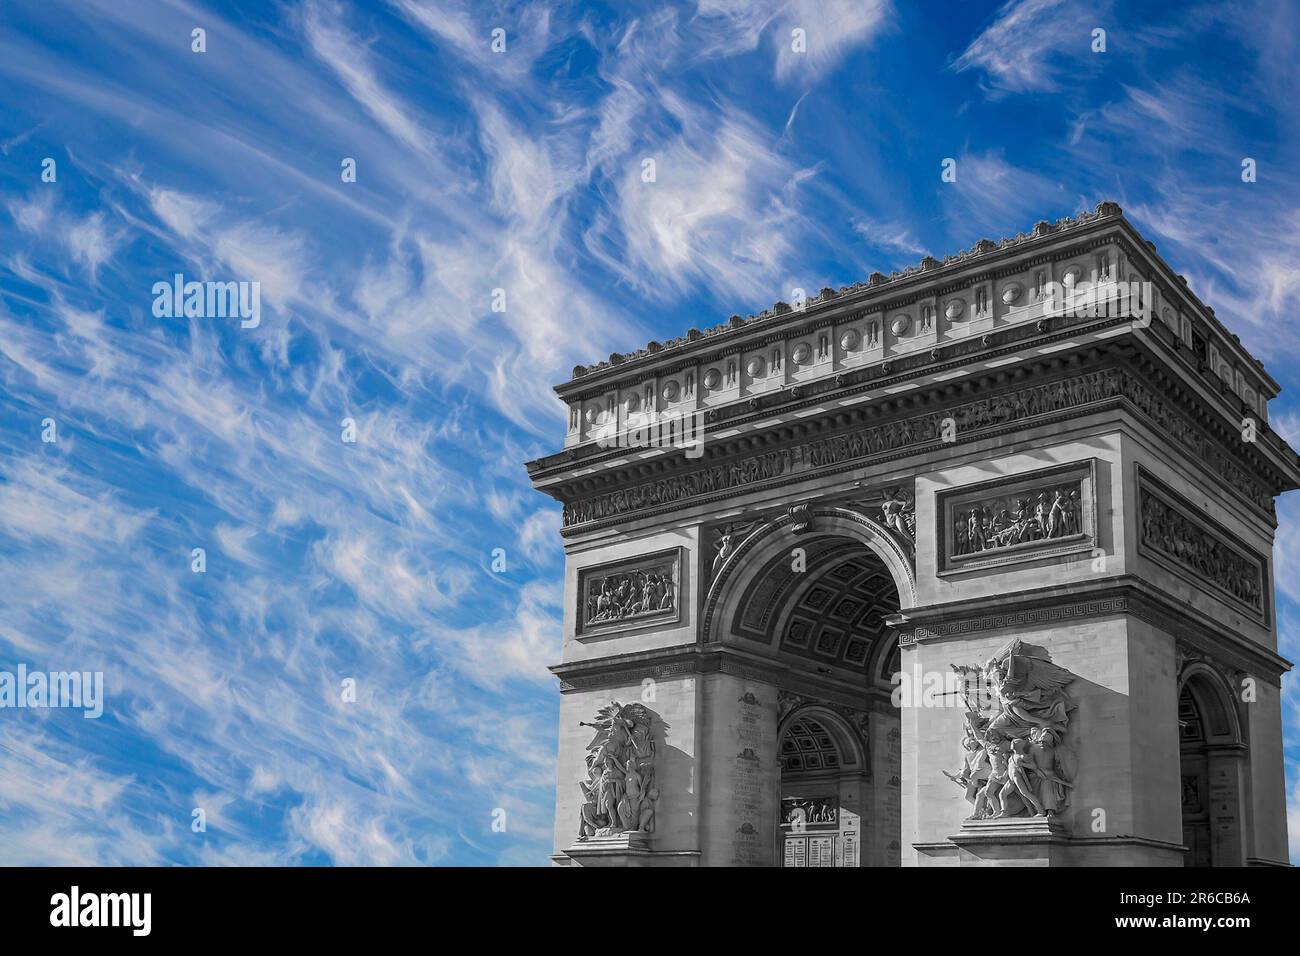 Arc de Triomphe (against the background of sky with clouds), Paris, France.  The walls of the arch are engraved with the names of 128 battles and names  Stock Photo - Alamy